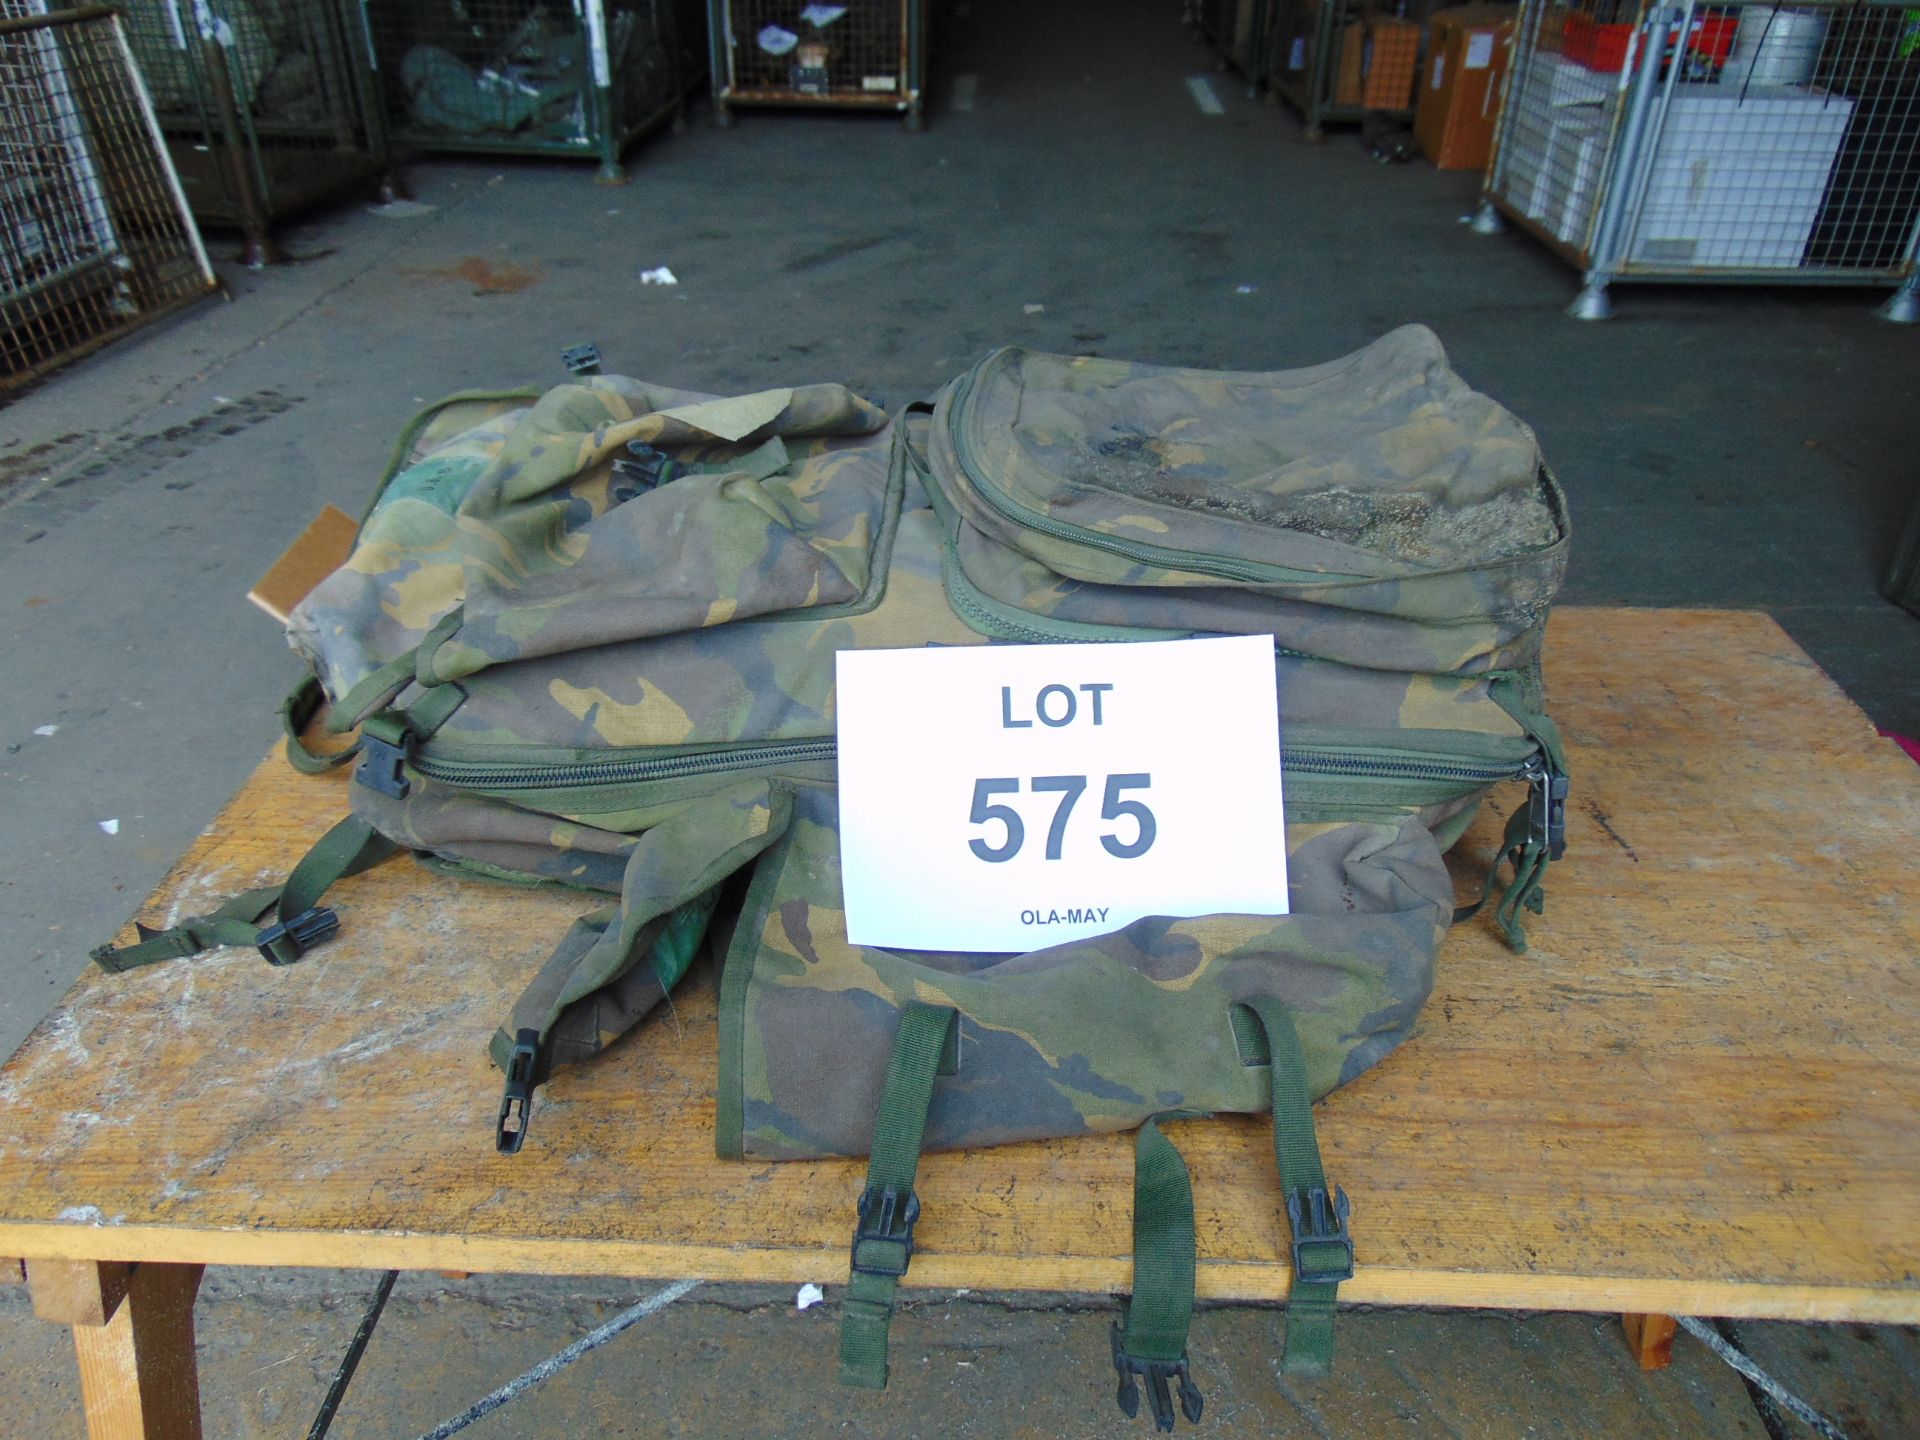 British Army Tactical Field Rucksac c/w Coms Equipment - Image 13 of 13